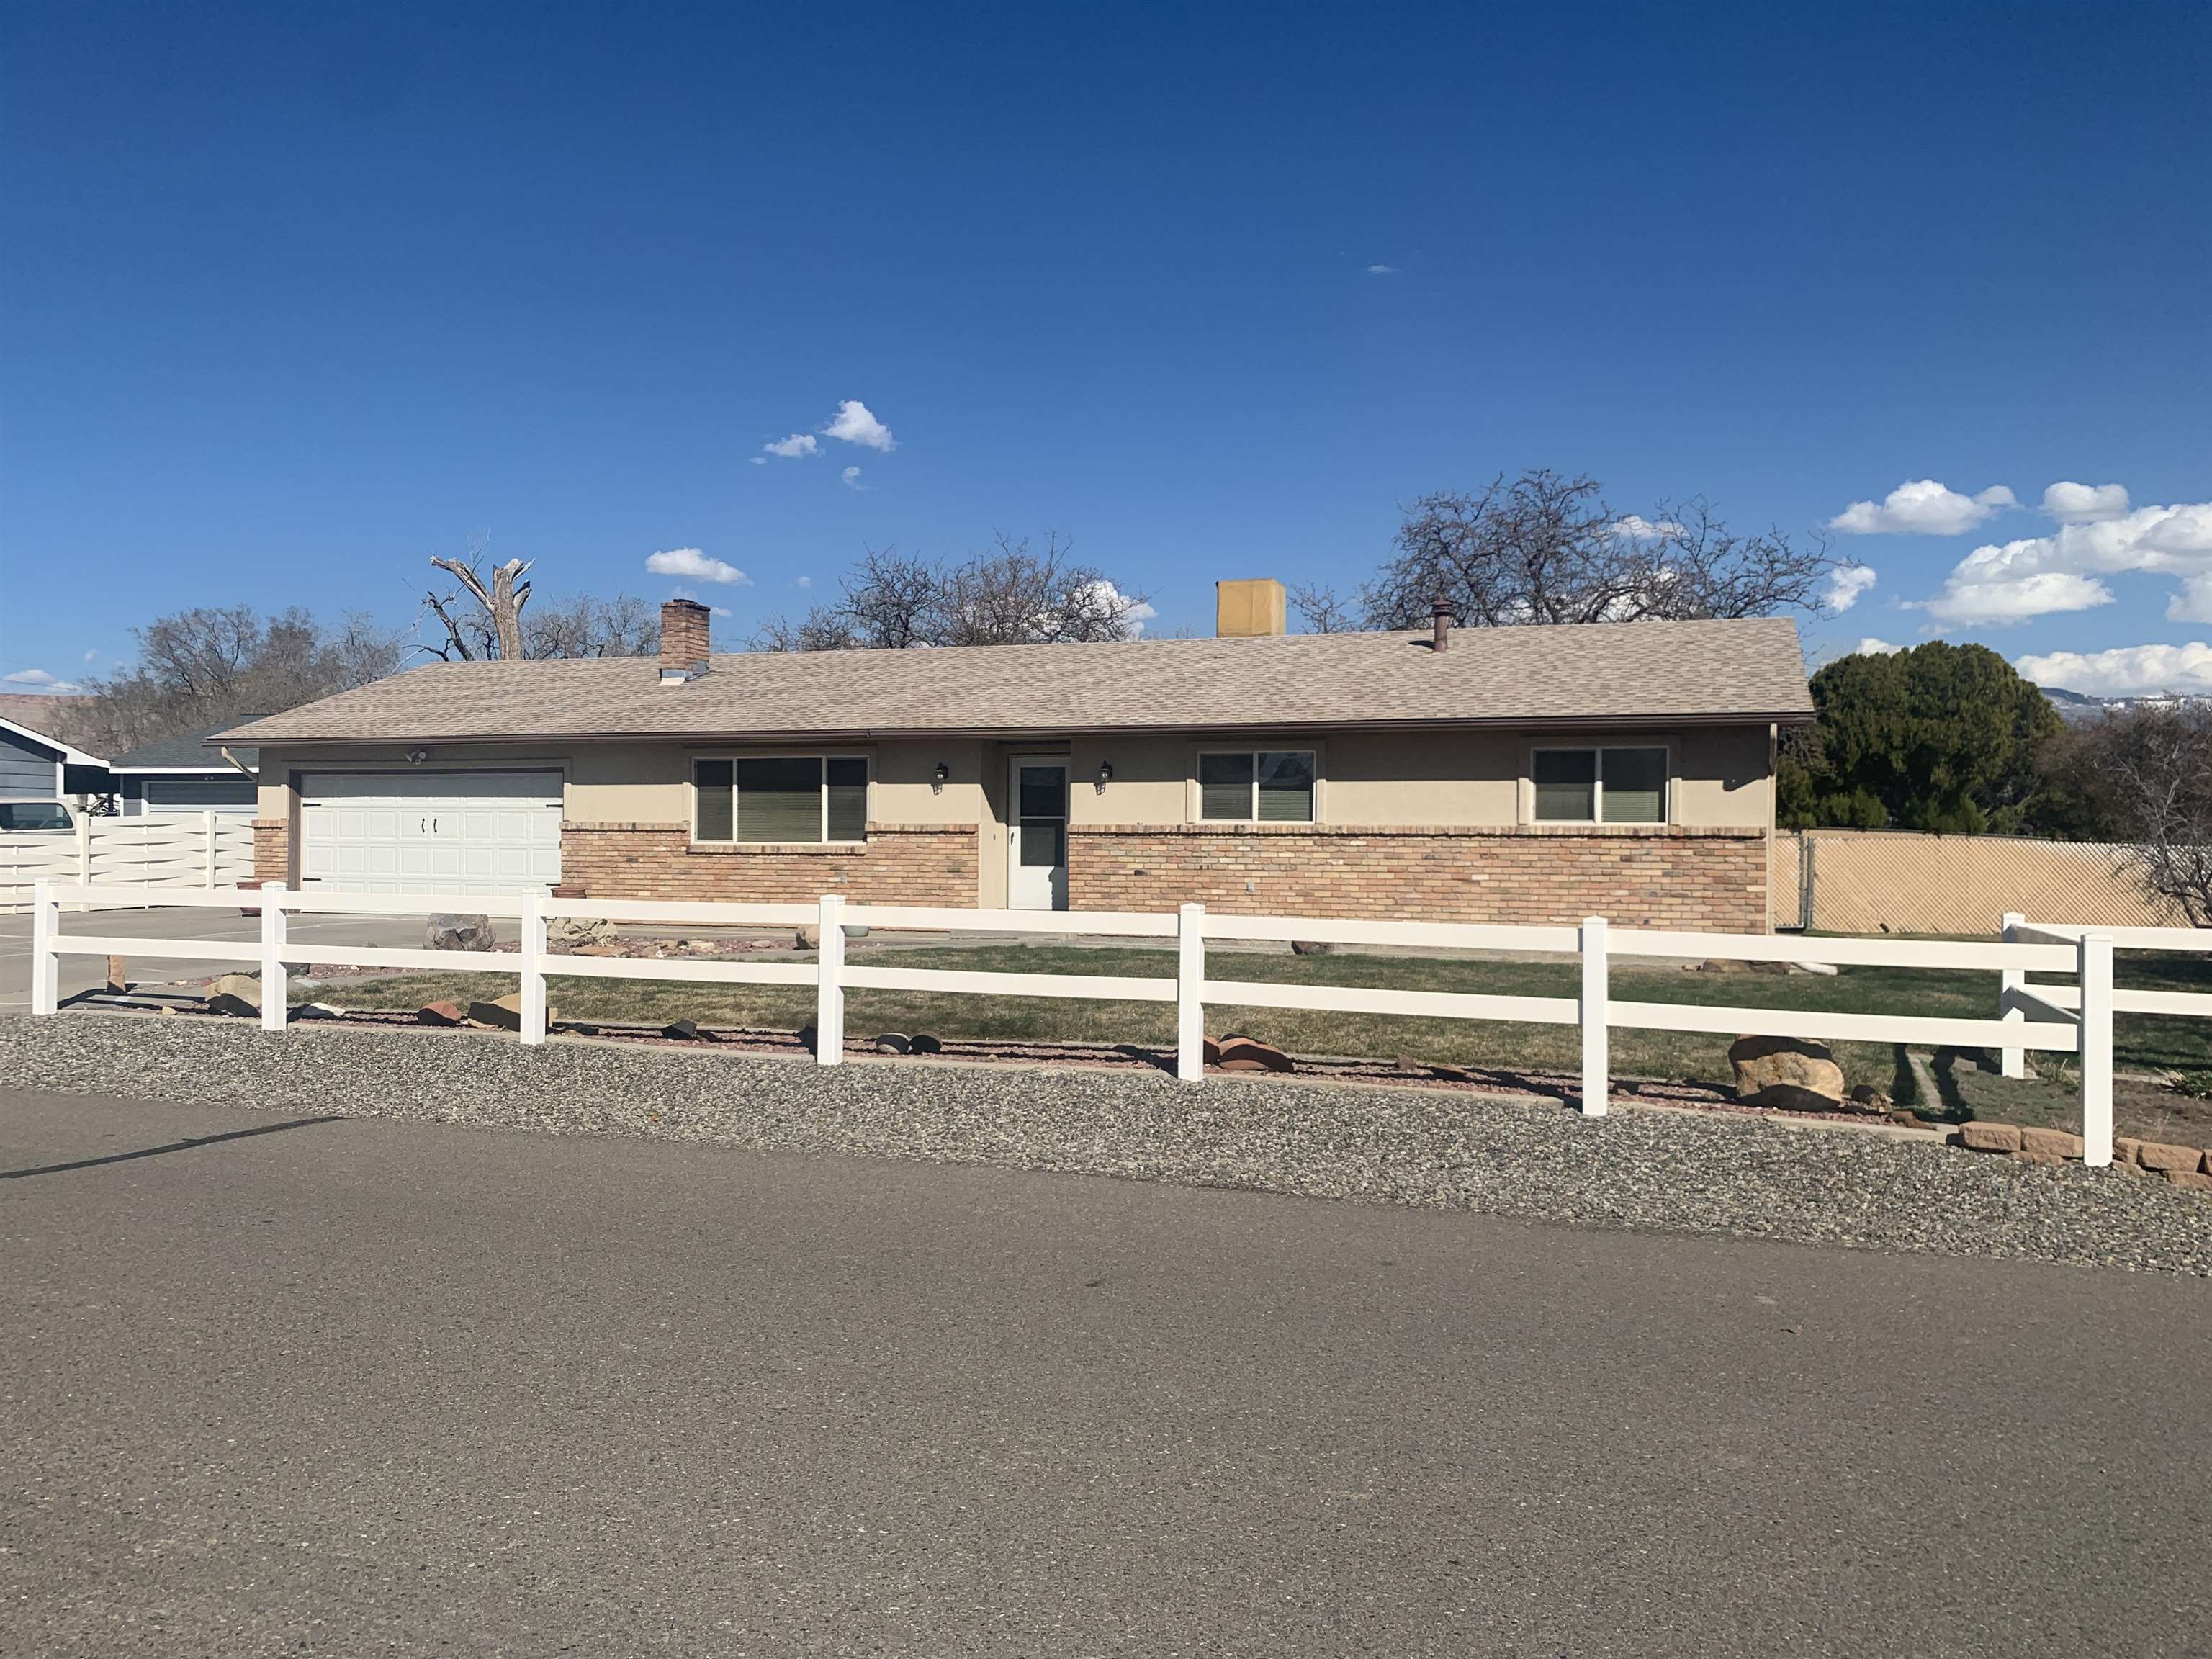 492 31 1/4 Road, Grand Junction, CO 81504